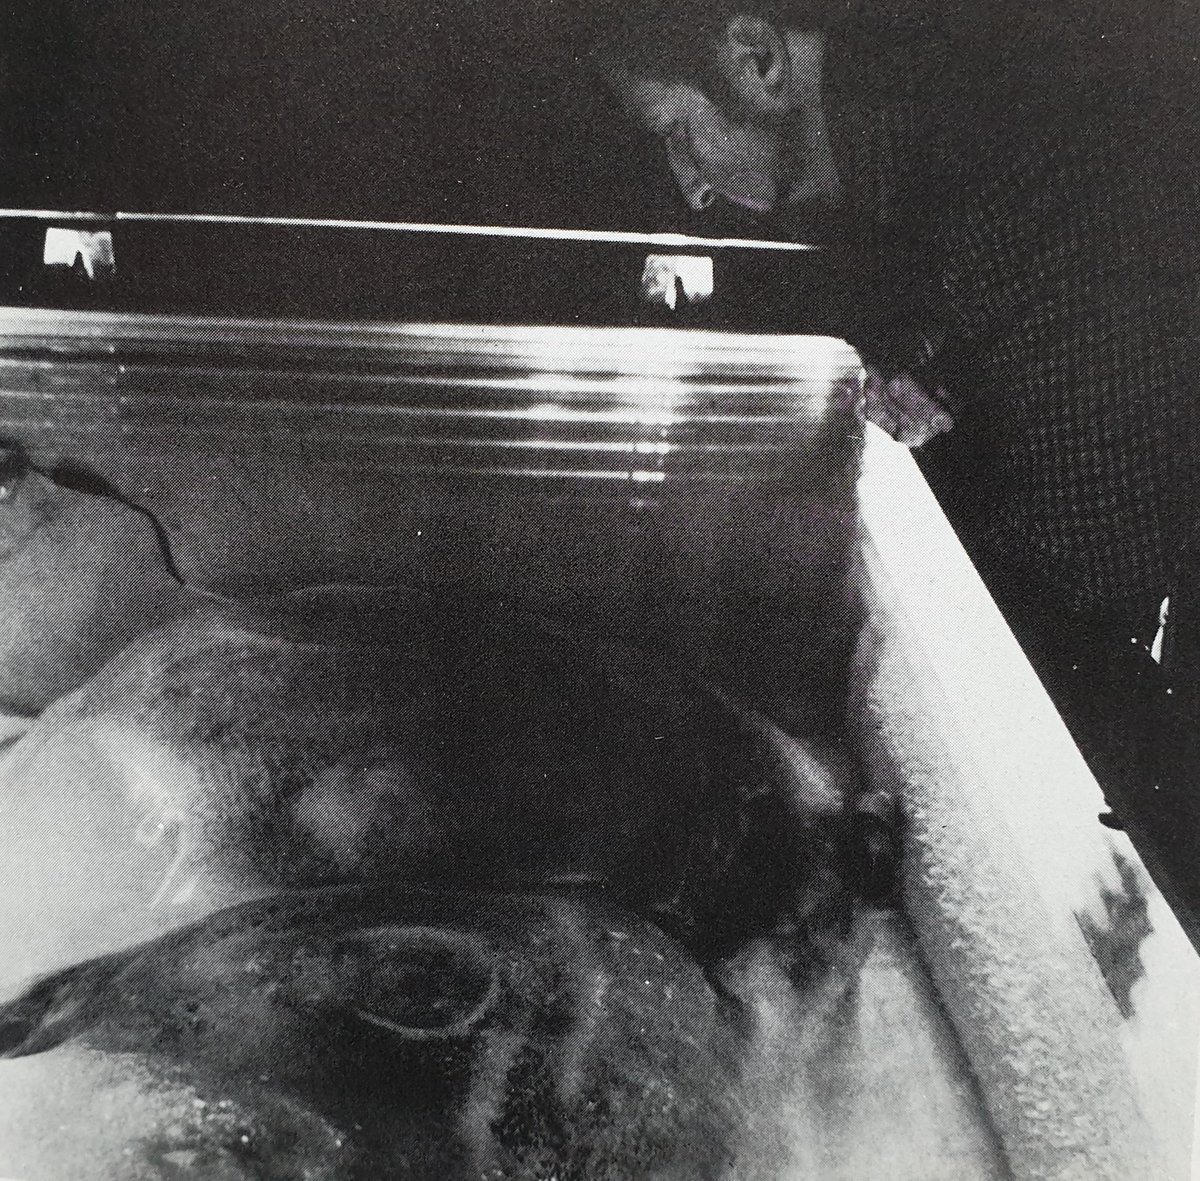 Heuvelmans and Sanderson examined the iceman while it was off-show during December 1968, at Hansen’s property. It was kept in a refrigerated truck (shown here). Over the course of three days (16-18th December), Hansen let them take photos, measurements, illustrations and notes…